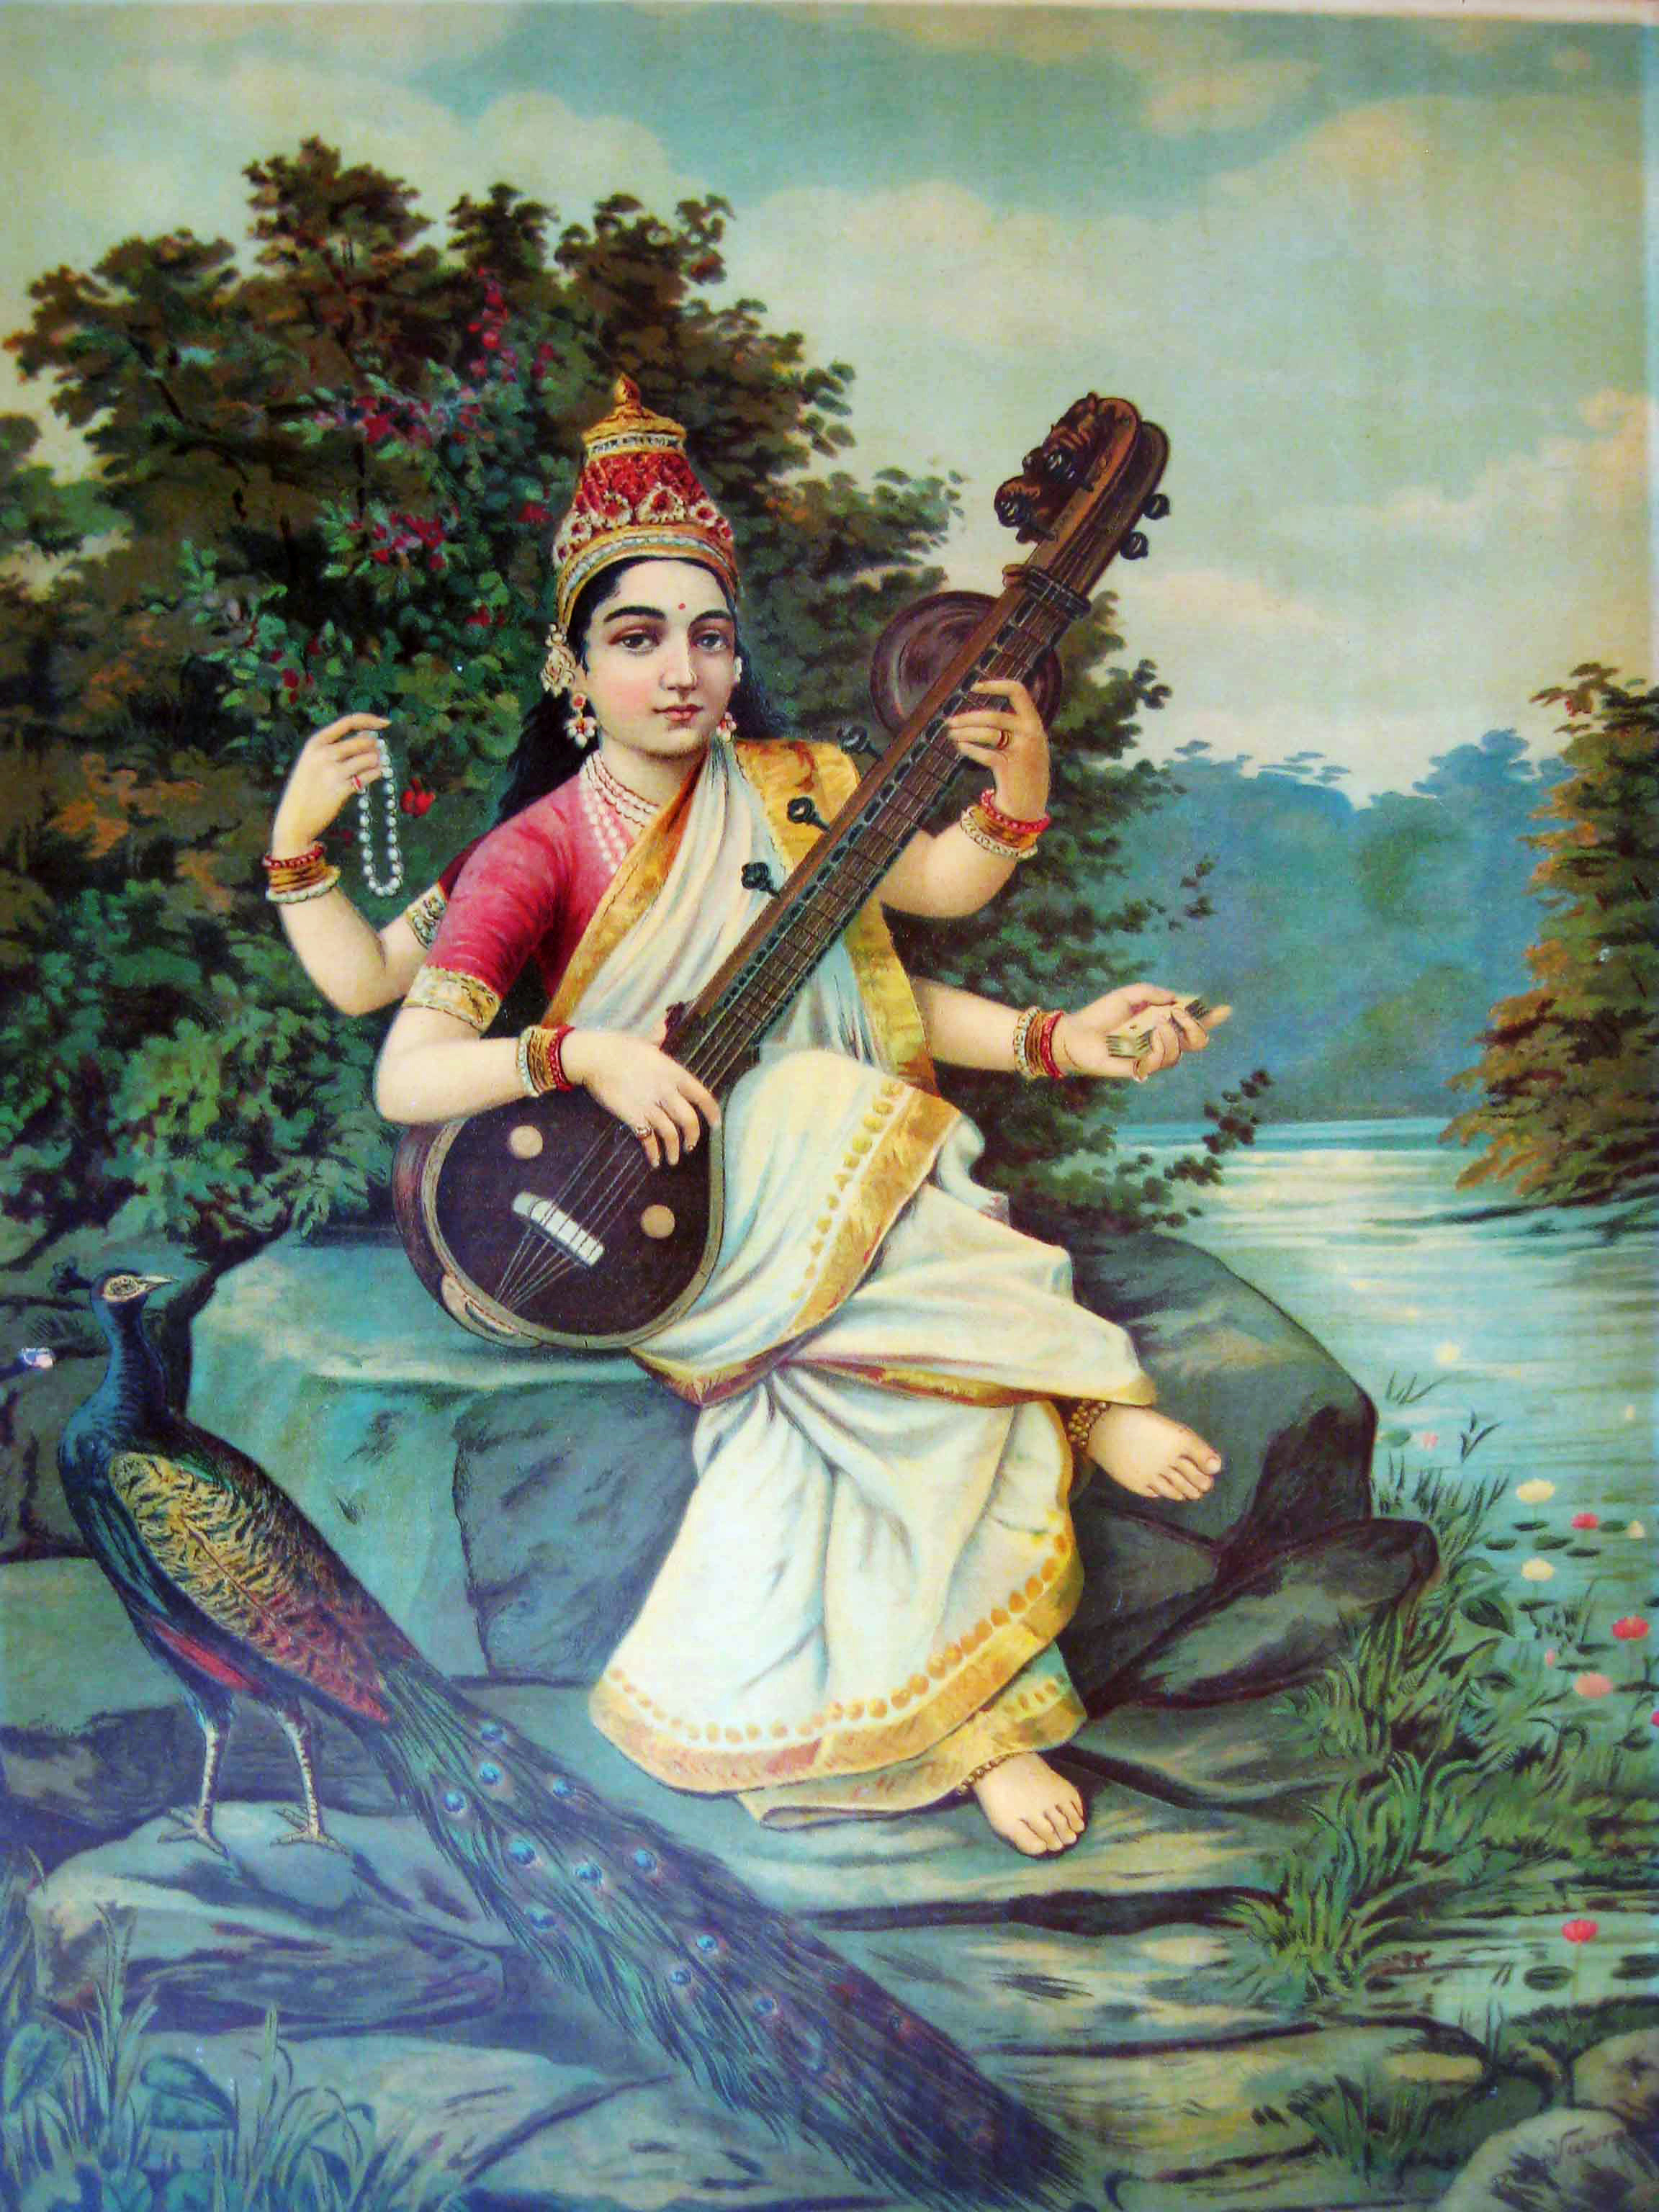 SPIRITUALITY SCIENCE - THE ORIGIN OF MAN: In Indian tradition, Goddess Sarasvati personifies human intellectual abilities like Language, Art, Music. She is the Goddess of Speech, Pure Knowledge and of Perfect Wisdom. In Indian Culture, human learning commences after seeking Her Blessings for the fulfilment of human desire to acquire Knowledge and Wisdom.